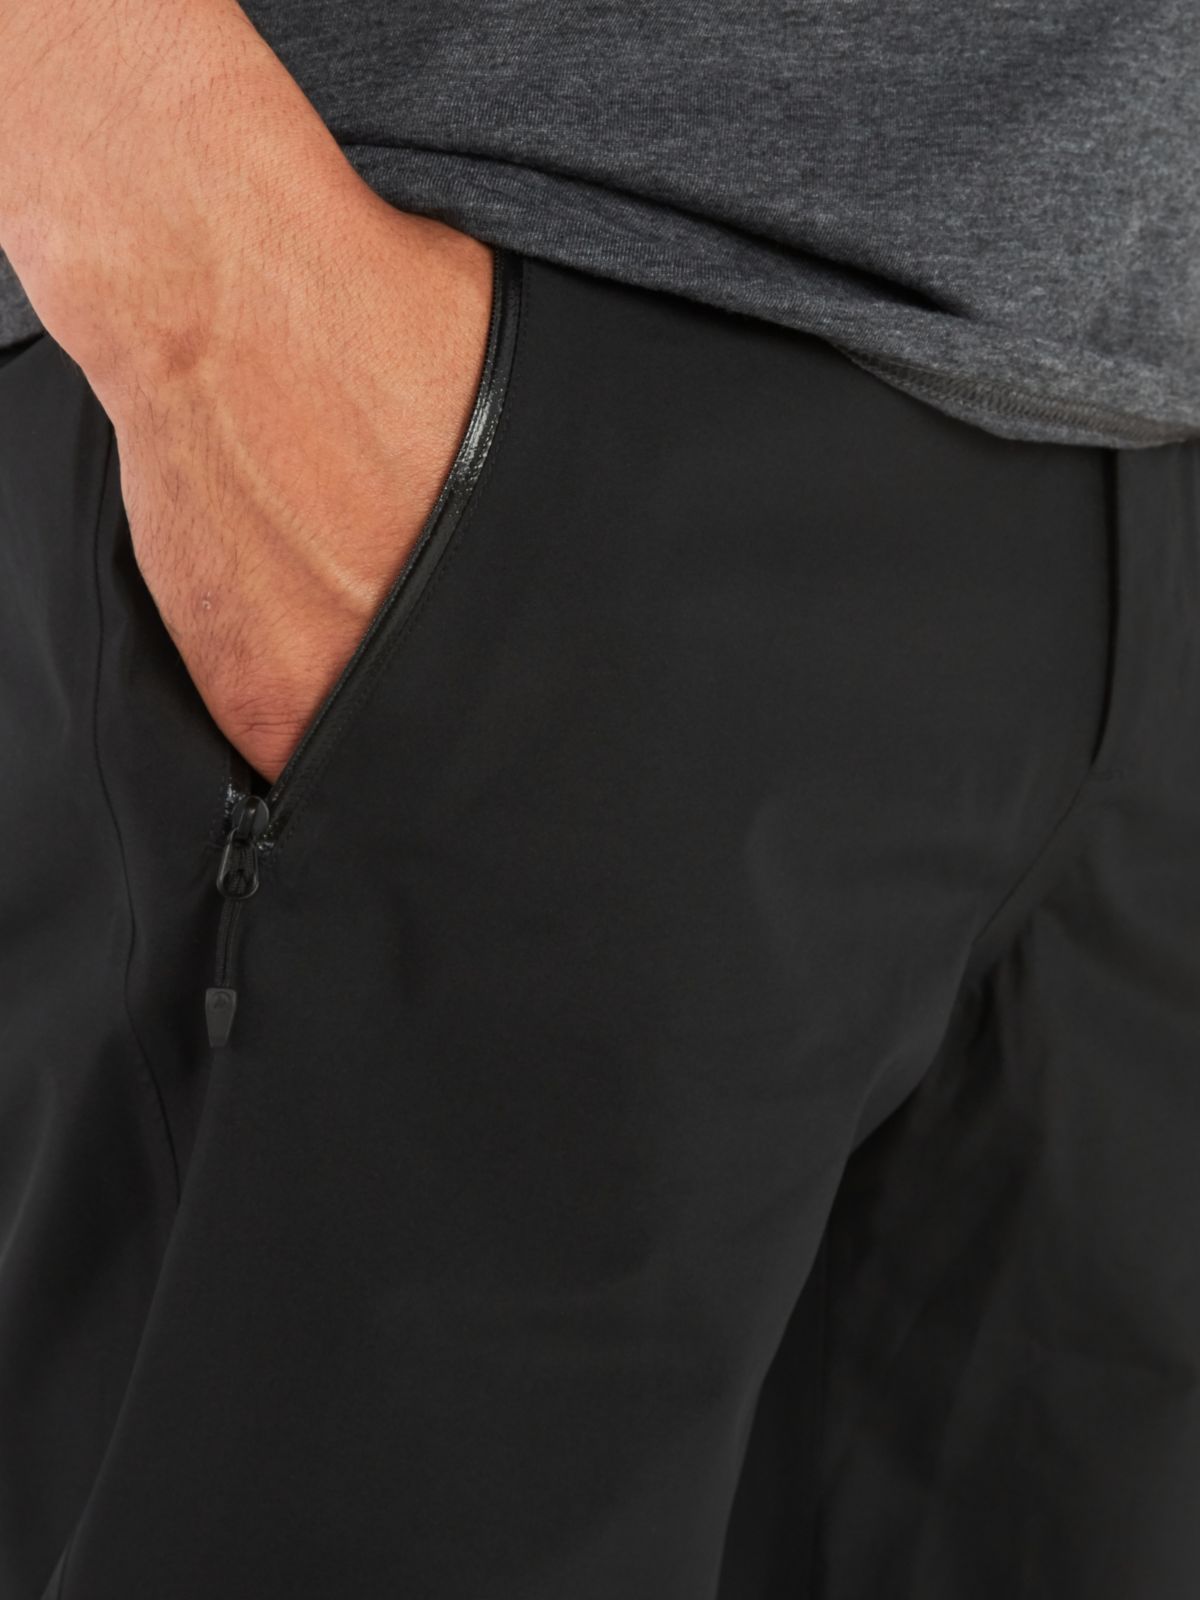 man with hand in pant's zipper pocket